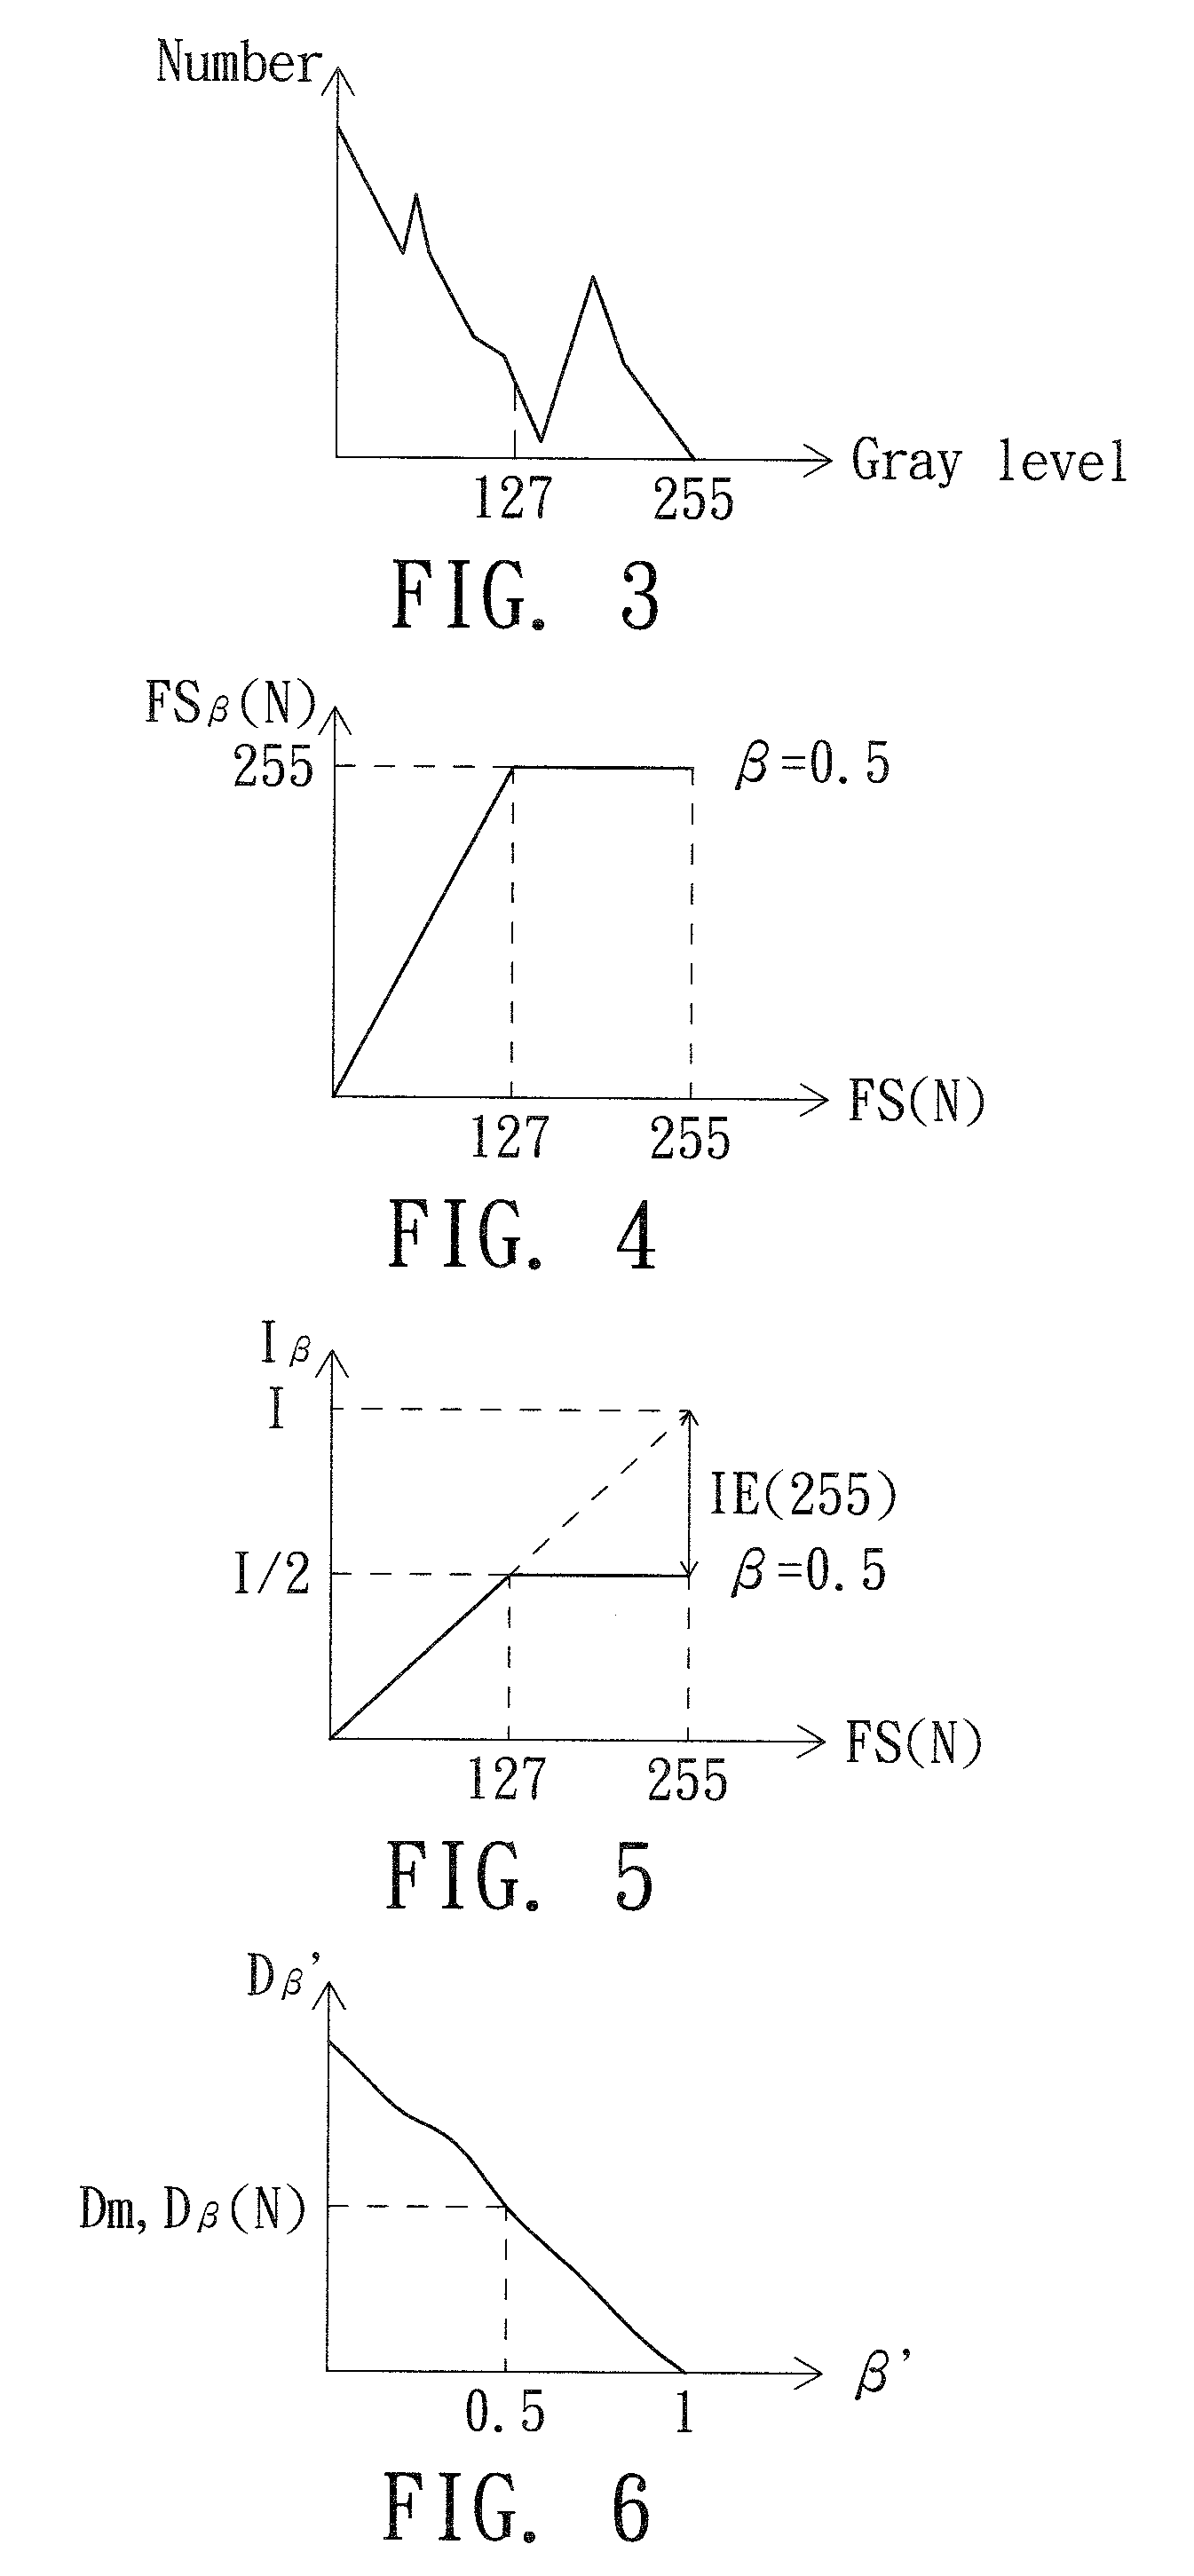 Backlight controller and scaling factor using full range search and local range search method